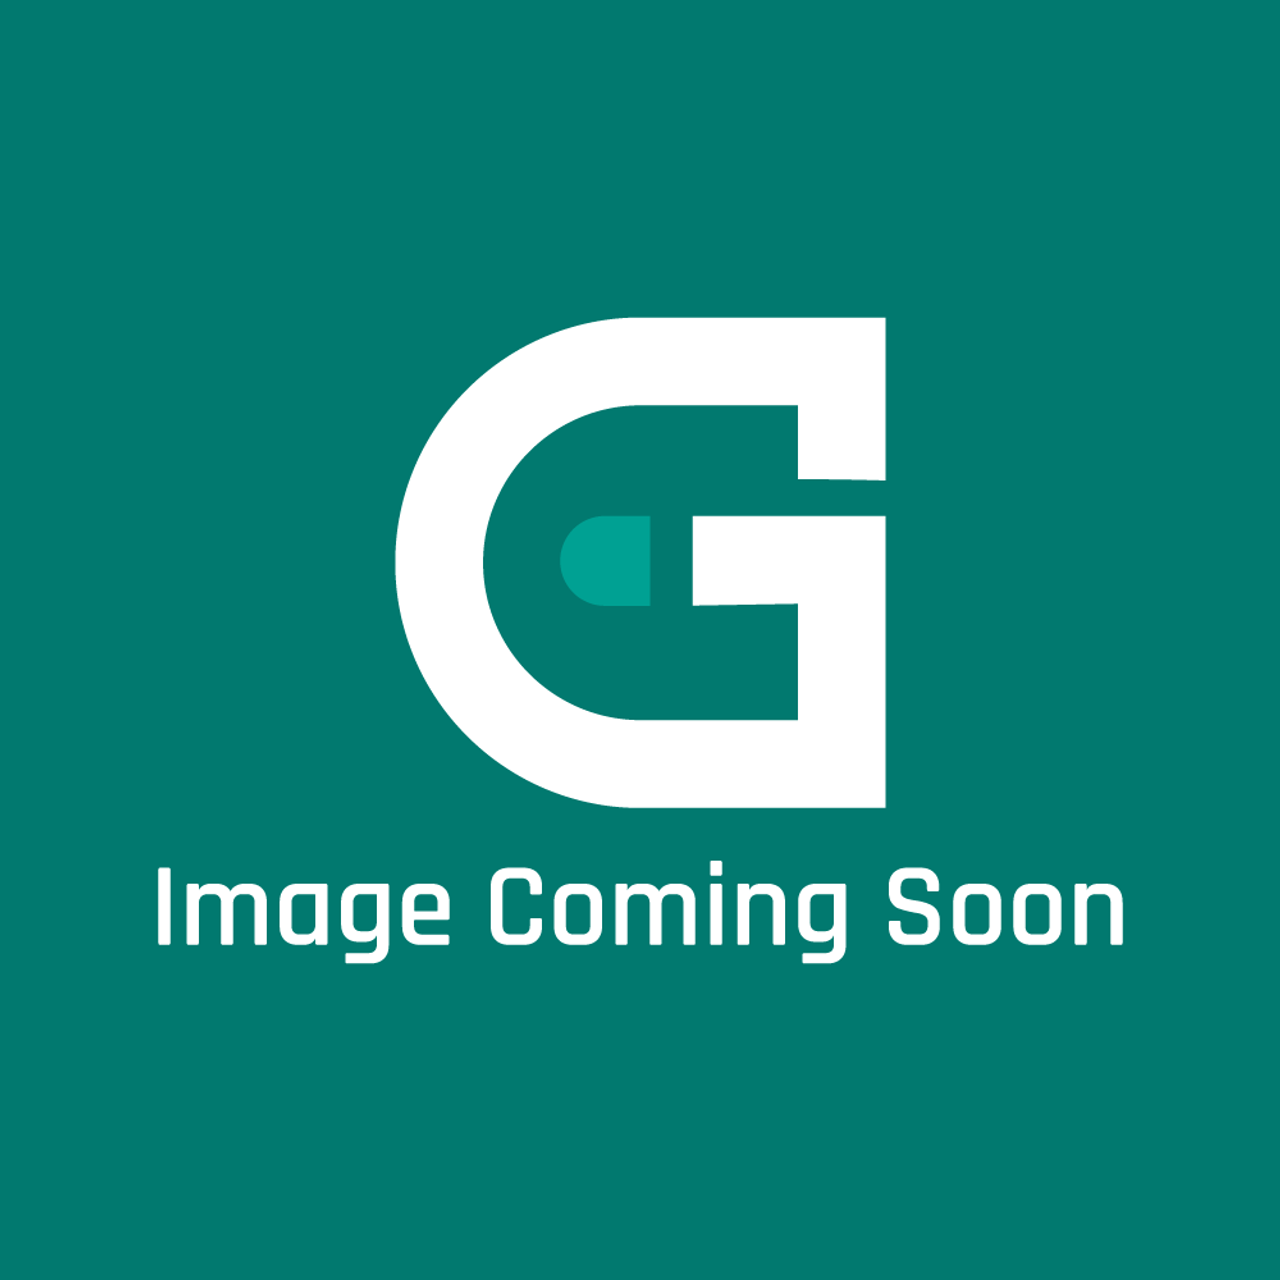 Garland CKG01894-01 - Thermostat Kit - Image Coming Soon!